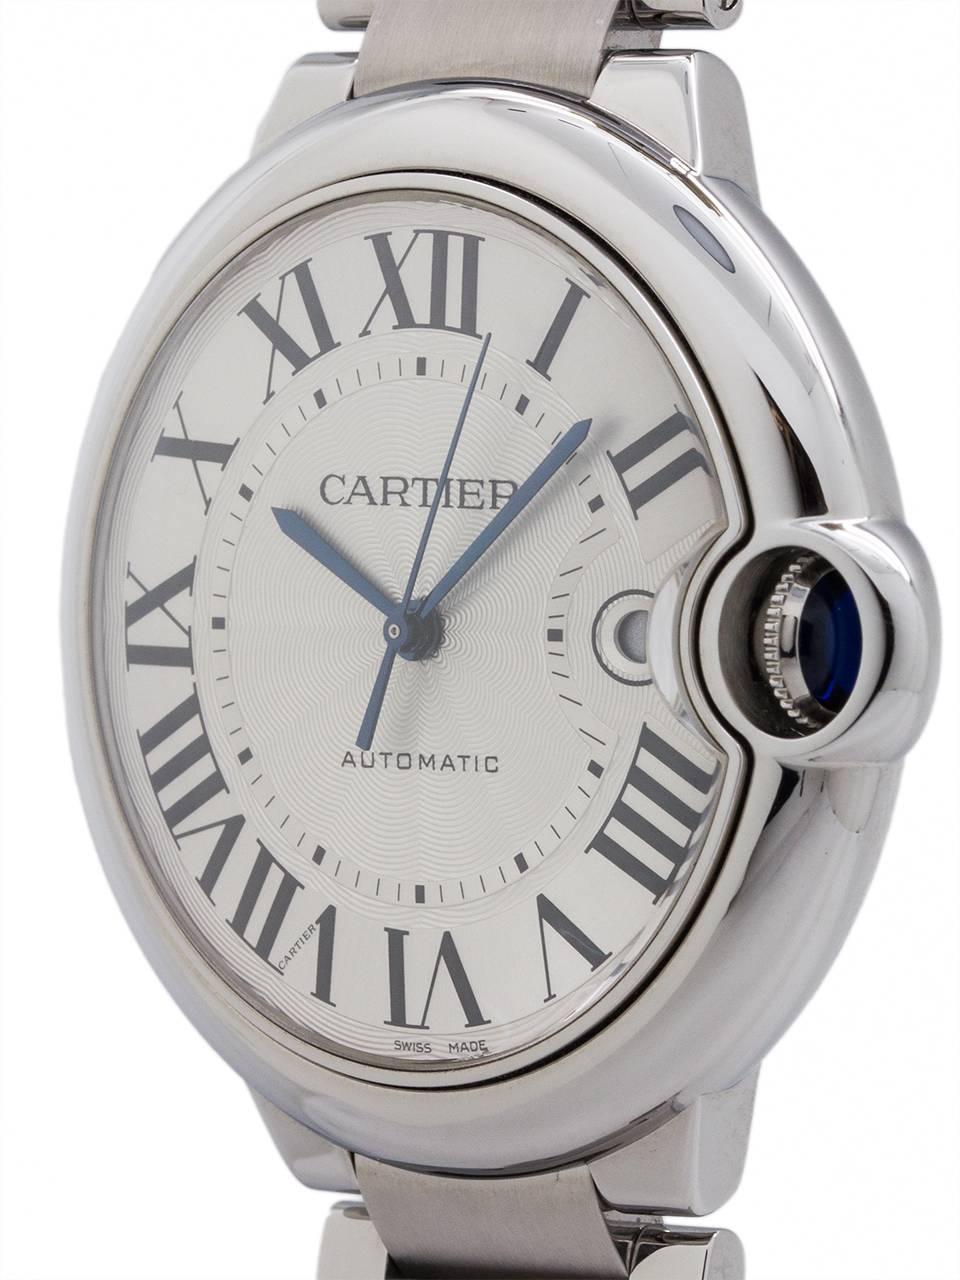 
Cartier man’s large 42mm stainless steel Ballon Bleu ref 3765 circa 2000’s. Featuring dome design case with smooth bezel, sapphire crystal and protected blue sapphire cabochon crown. Featuring classic silvered guilloche dial with large printed